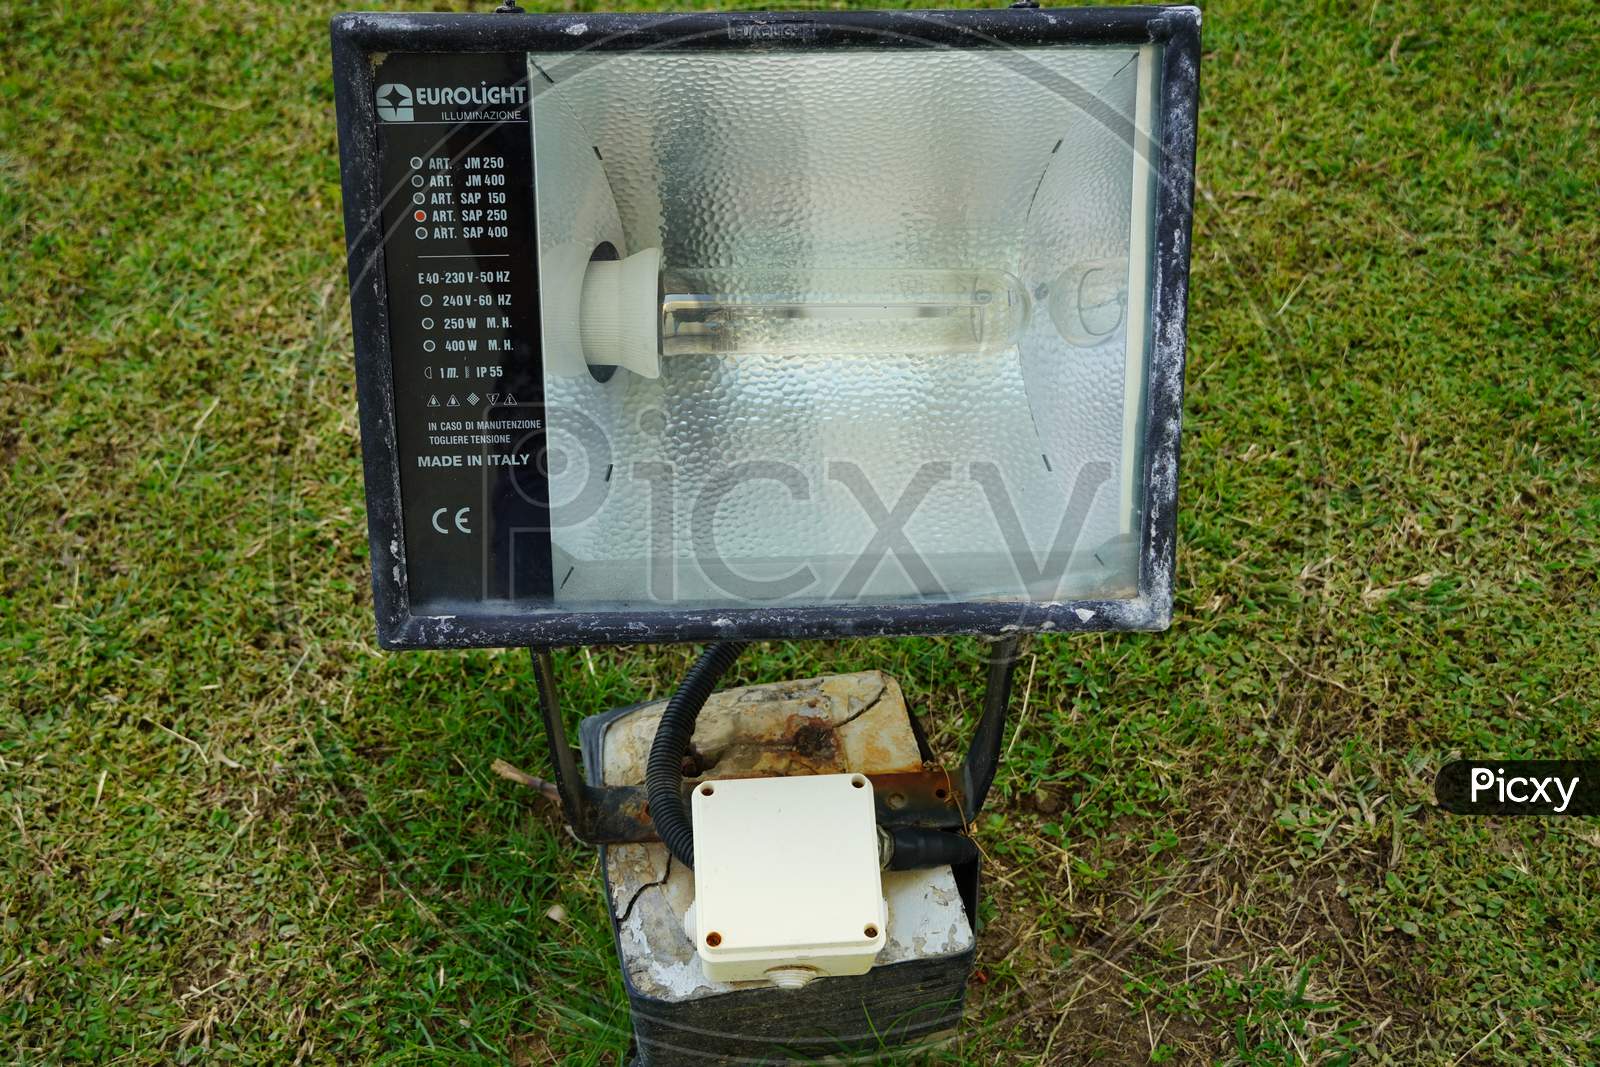 Dubai Uae - November 2019: Close Up Outdoor Led Lamp On The Yard. Large Outdoor Light For Building Coloring. Led Flood Light, Spot Light Which Lights Up A Building. Electrical Light In The Night.